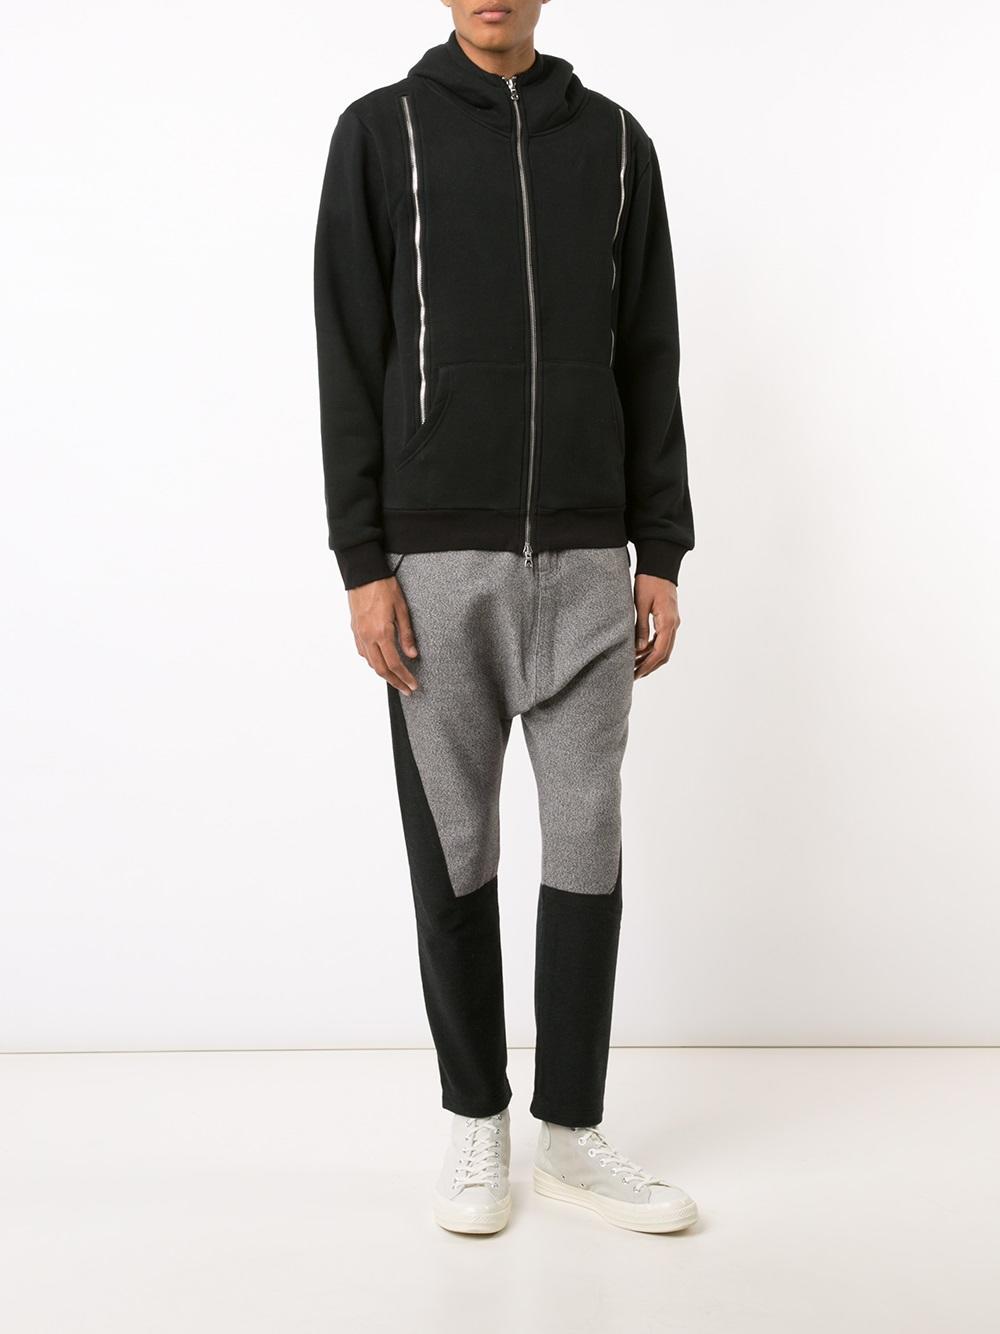 Lyst - Mostly Heard Rarely Seen Zippers Hoodie in Black for Men